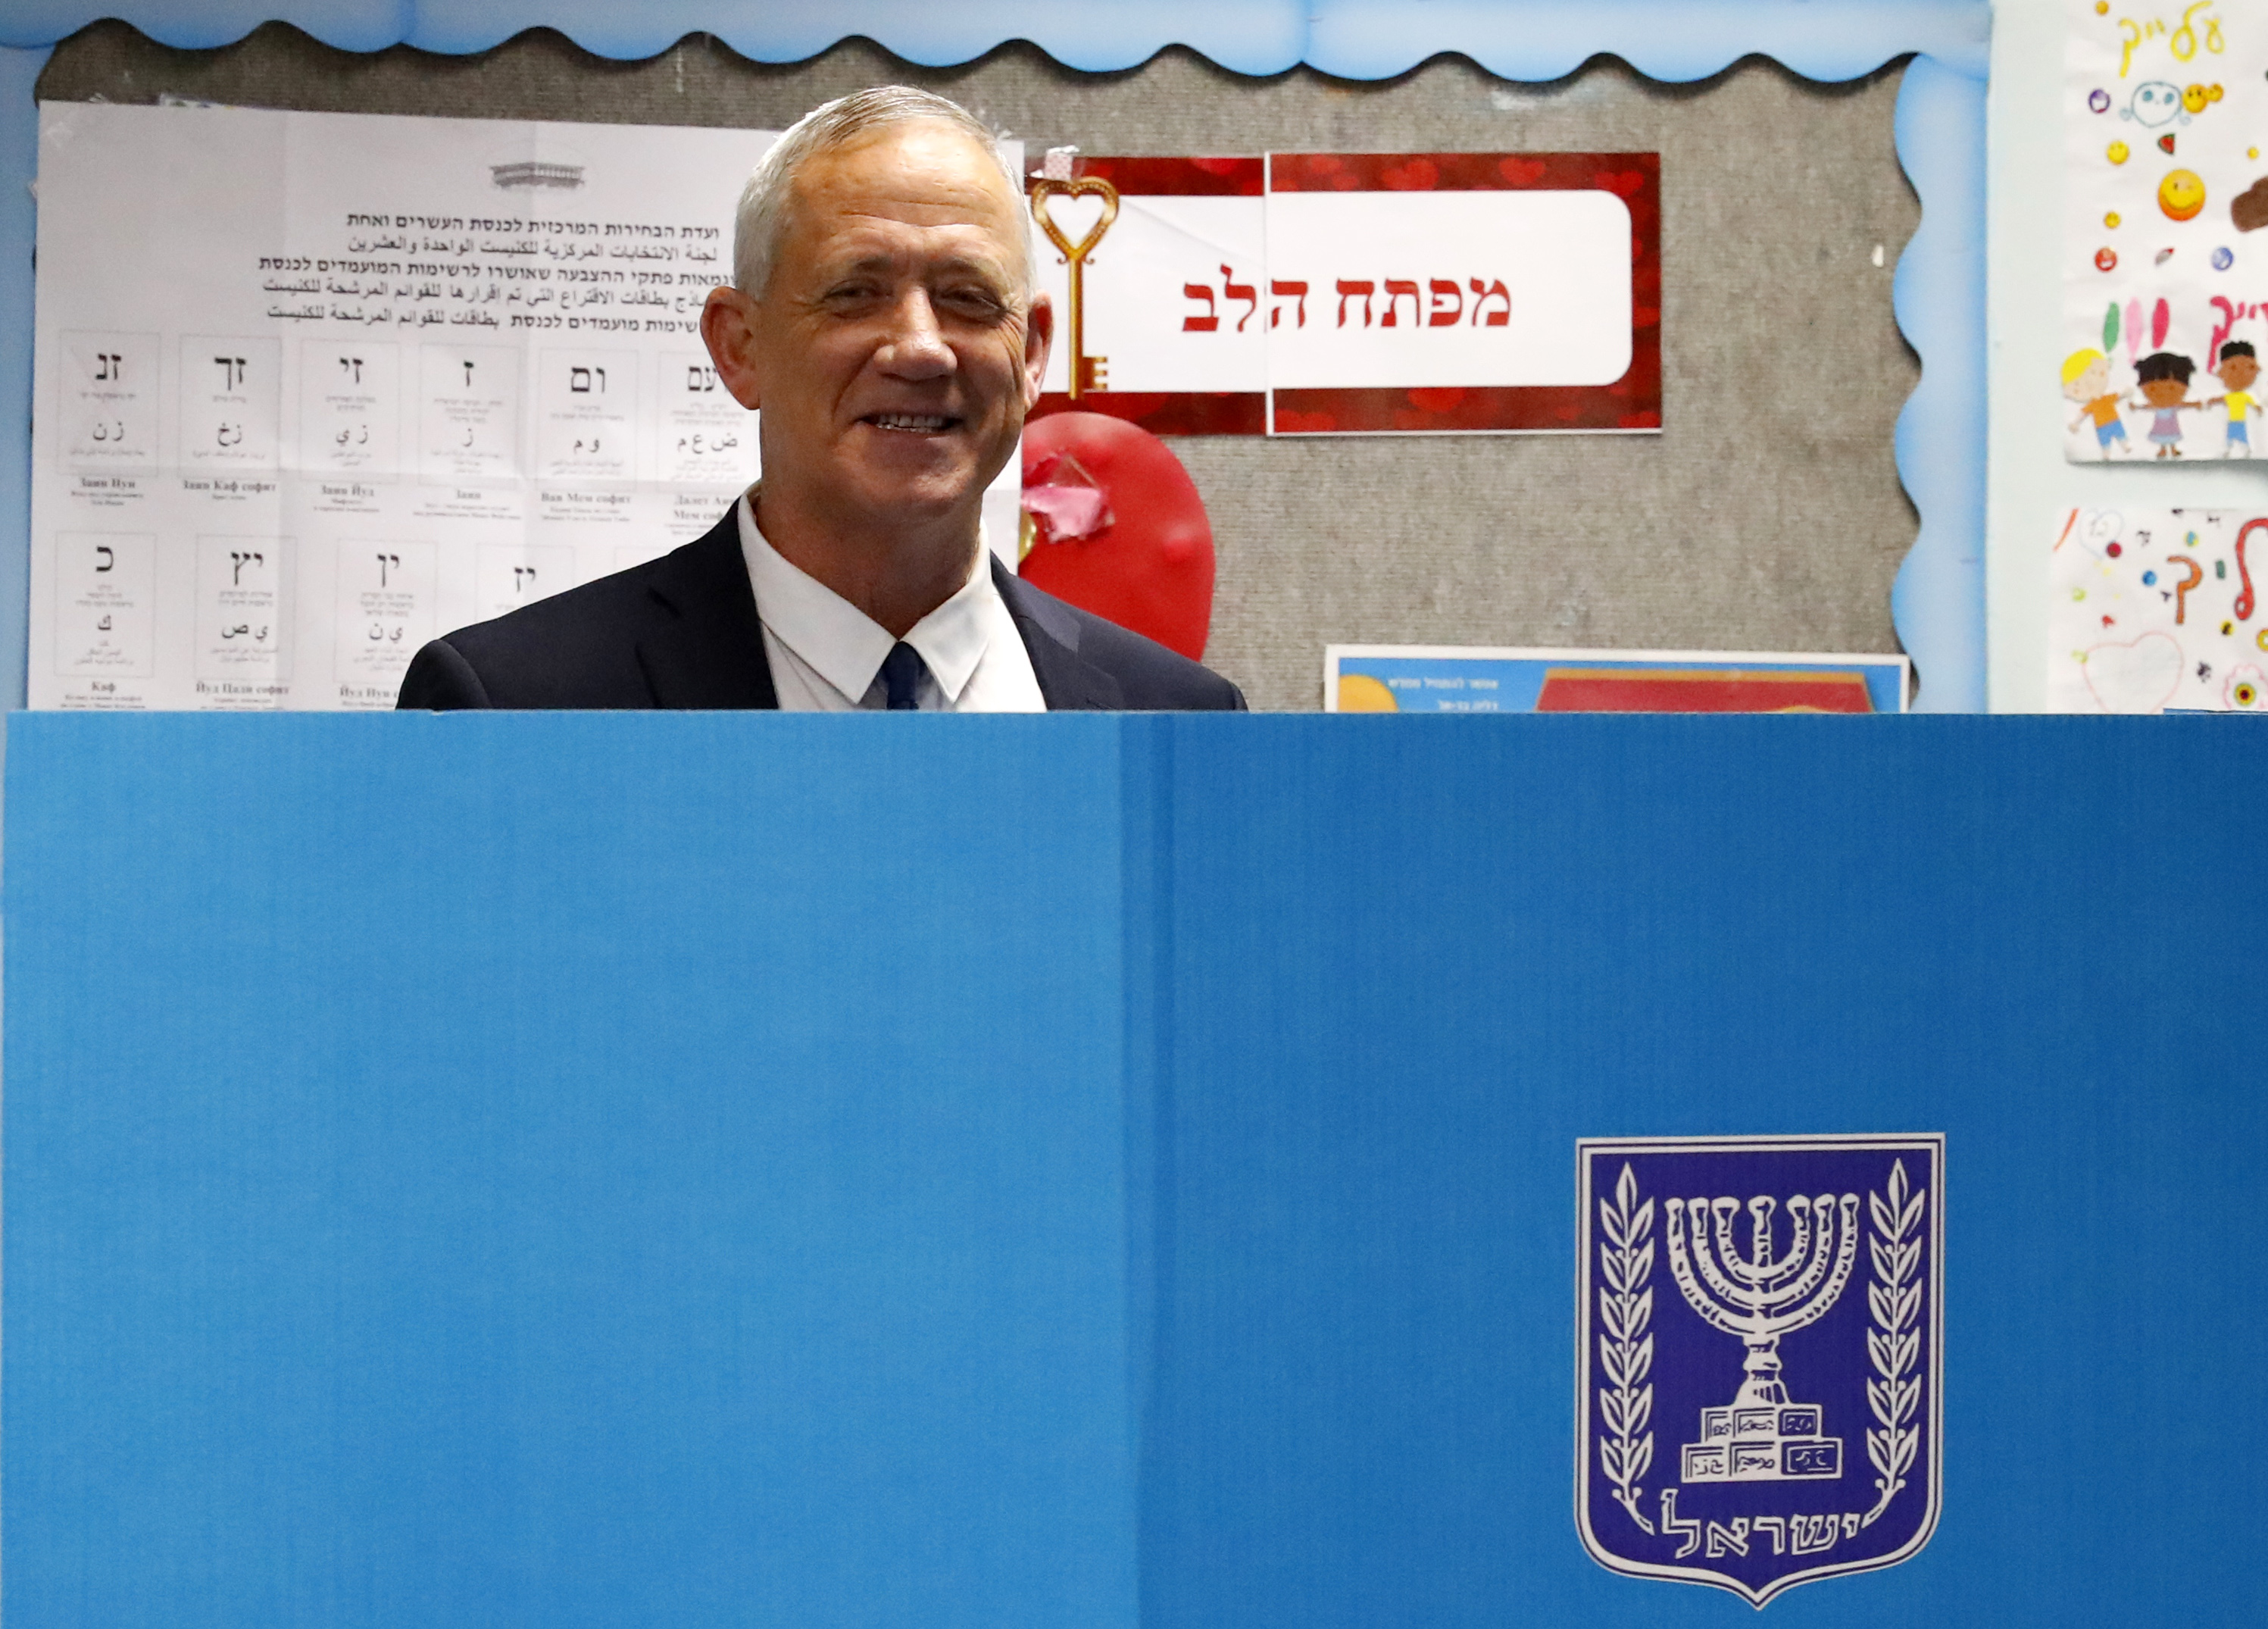 Retired Israeli general Benny Gantz, one of the leaders of the Blue and White (Kahol Lavan) political alliance, casts his vote (AFP)